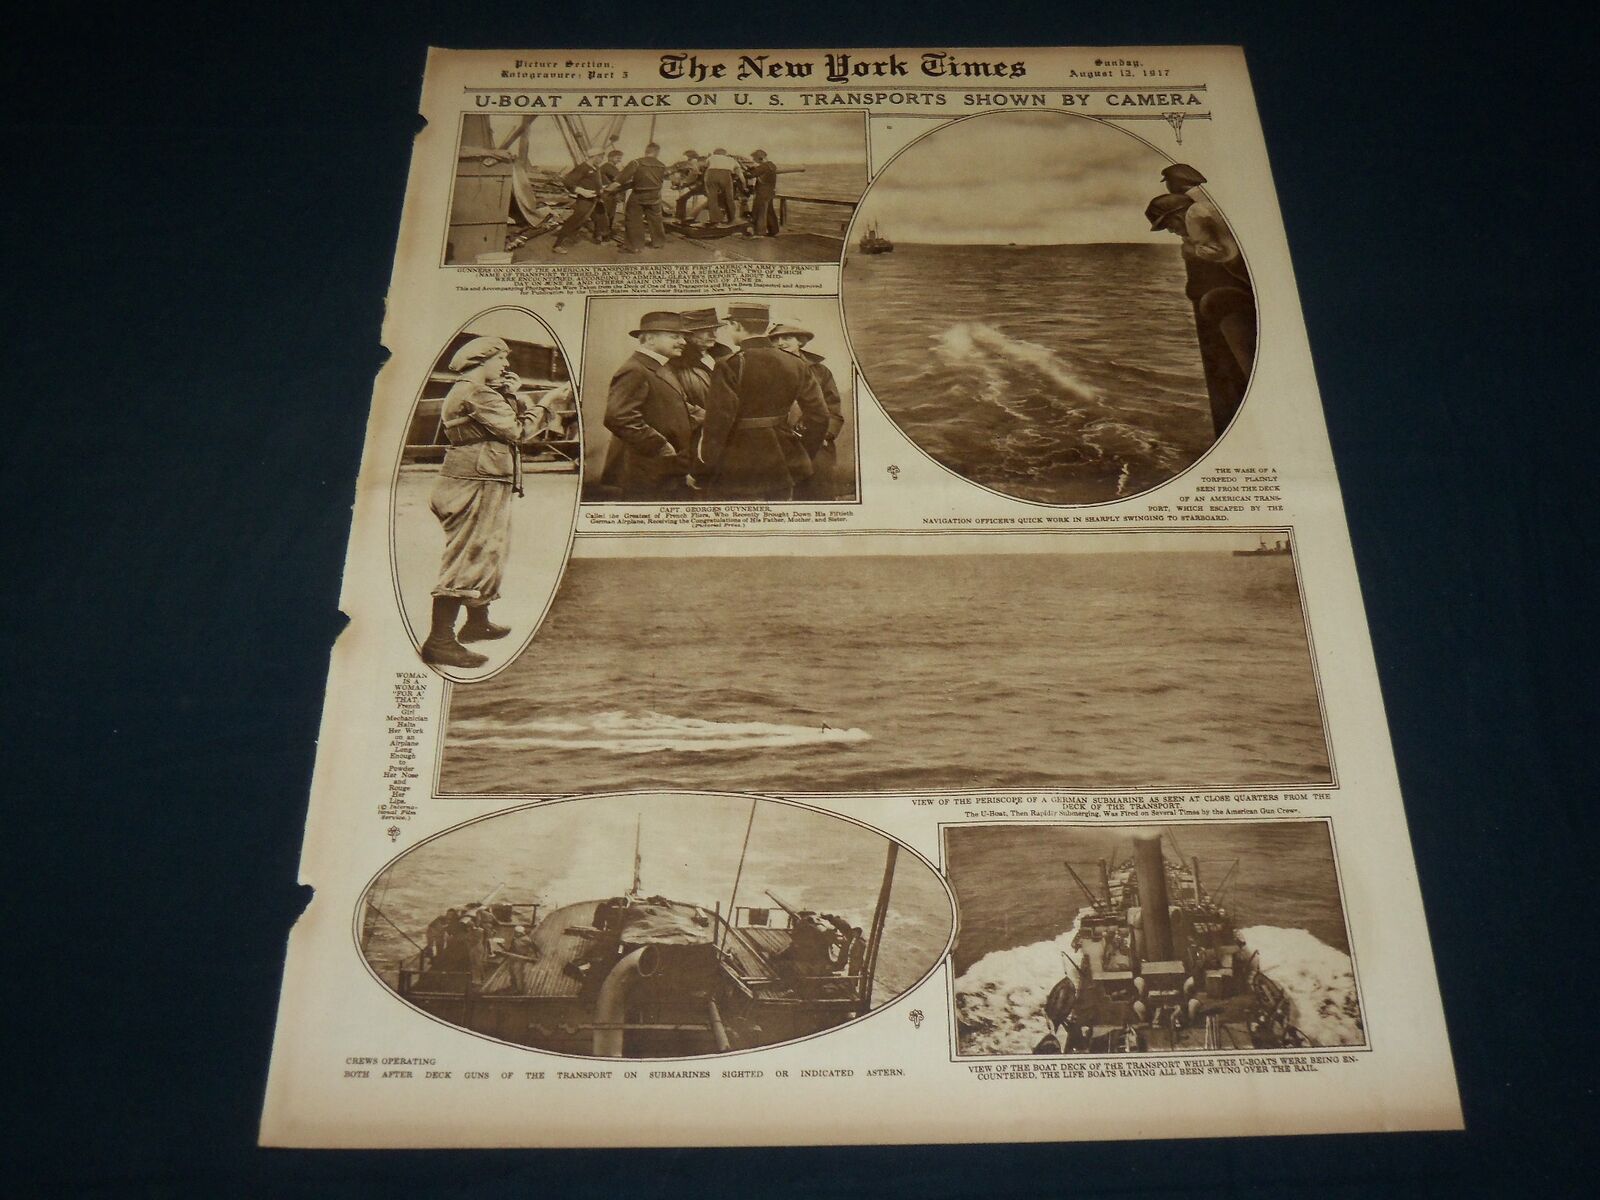 1917 AUGUST 12 NEW YORK TIMES ROTO PICTURE SECTION - U-BOAT ATTACK - NT 8994